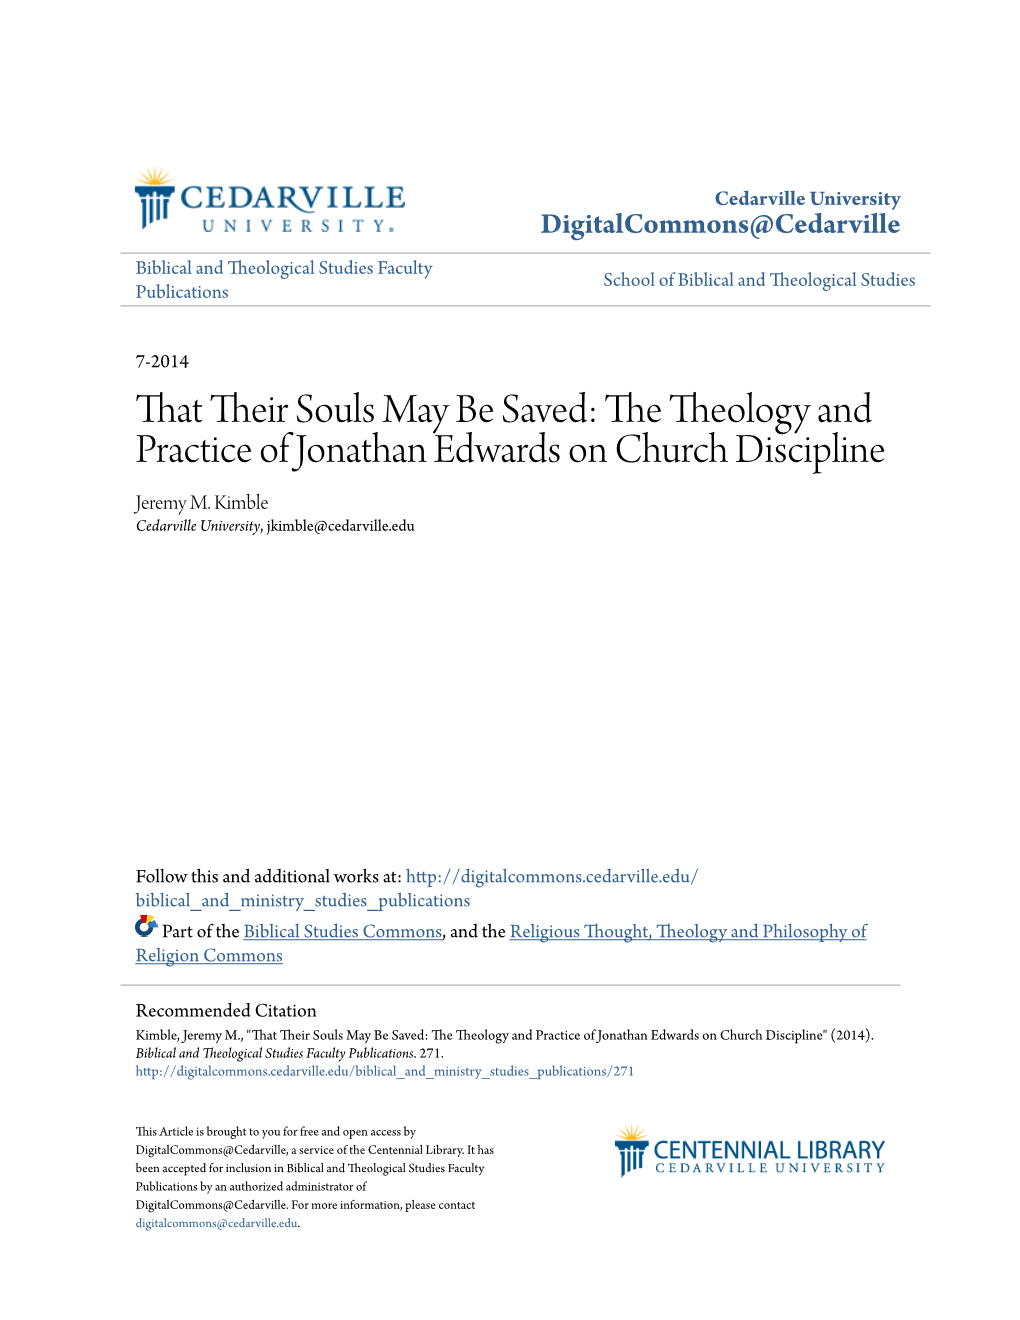 That Their Souls May Be Saved: the Theology and Practice of Jonathan Edwards on Church Discipline — Jeremy M